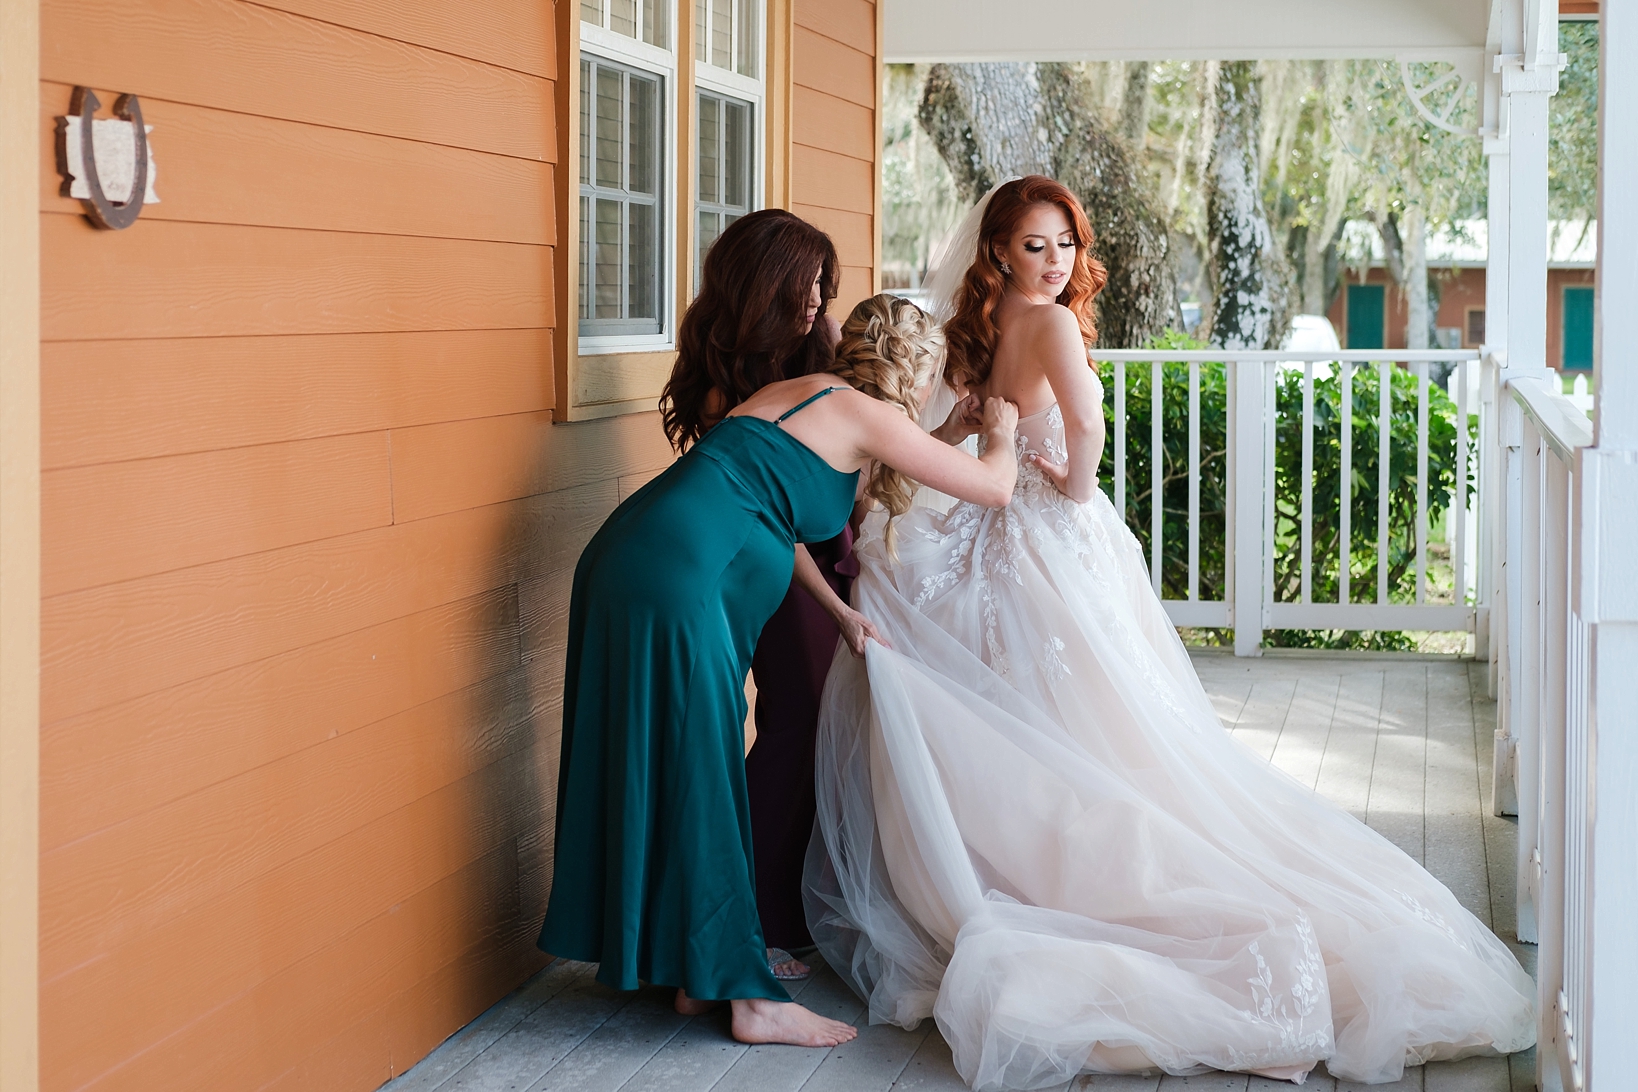 Maid of Honor helping her sister into her wedding gown before the wedding ceremony